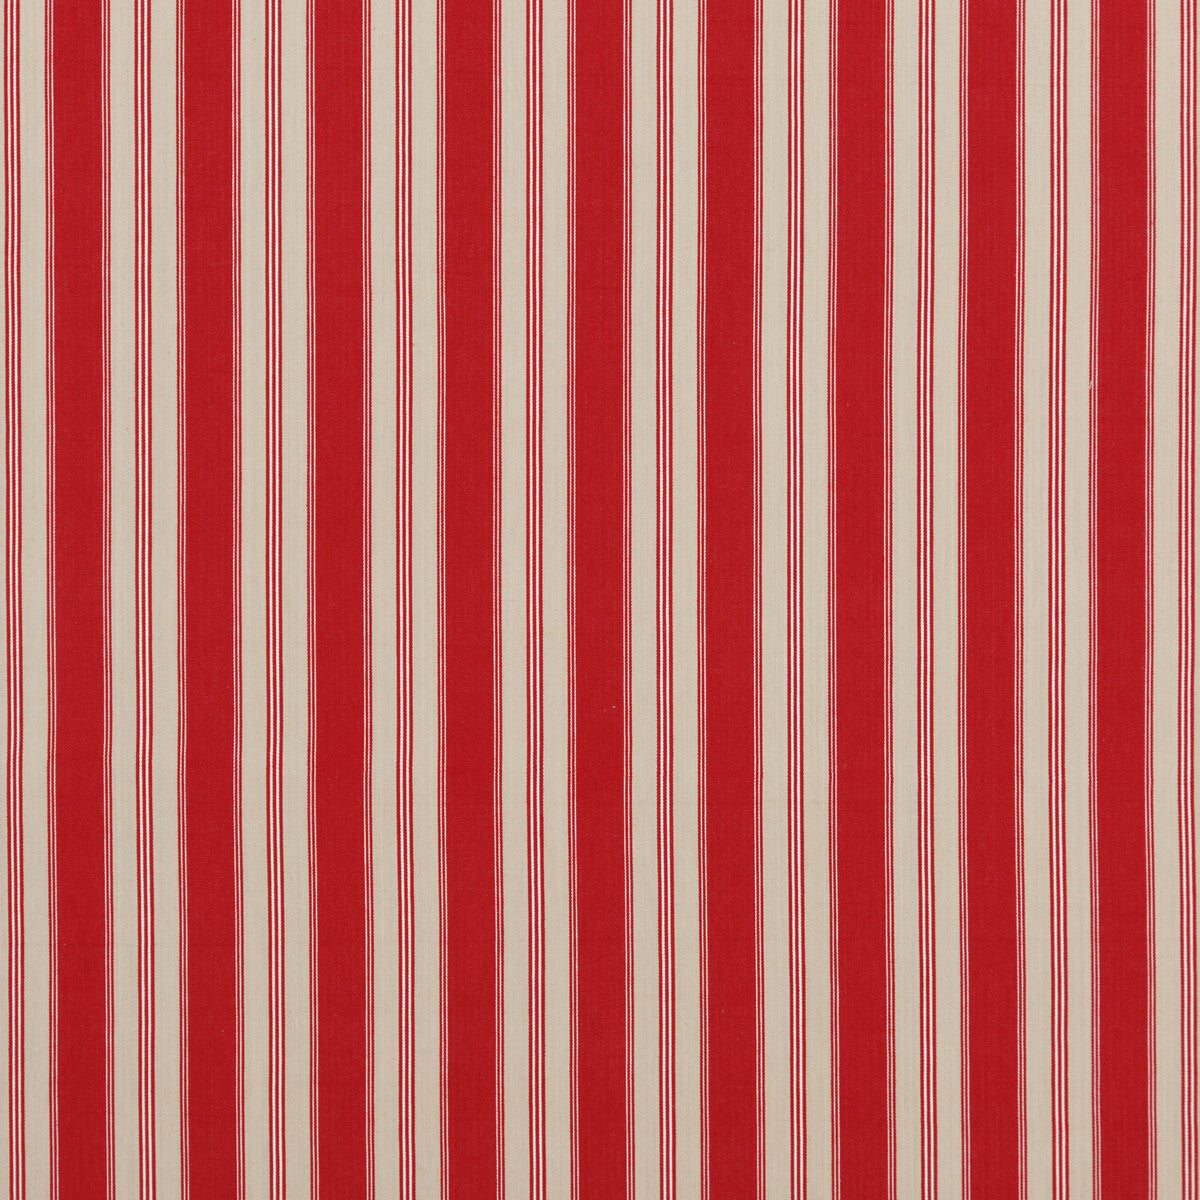 Tango Ticking fabric in red color - pattern PF50430.4.0 - by Baker Lifestyle in the Carnival collection